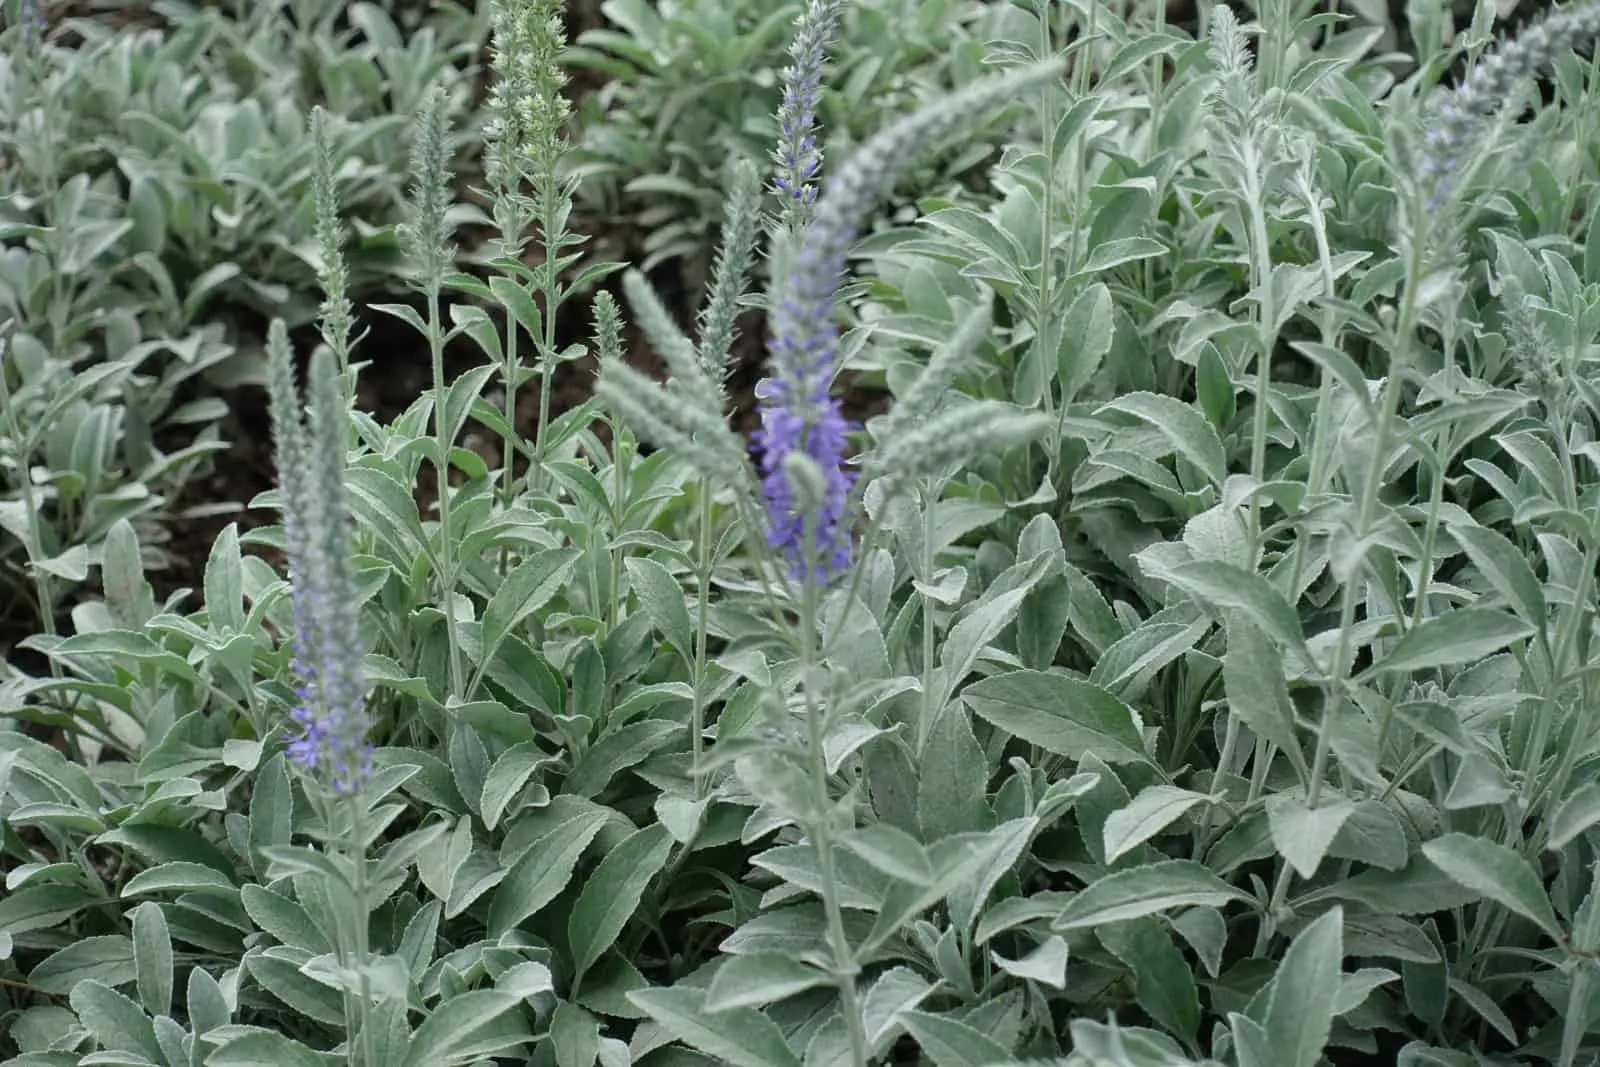 Beginning of florescence of Veronica incana in May